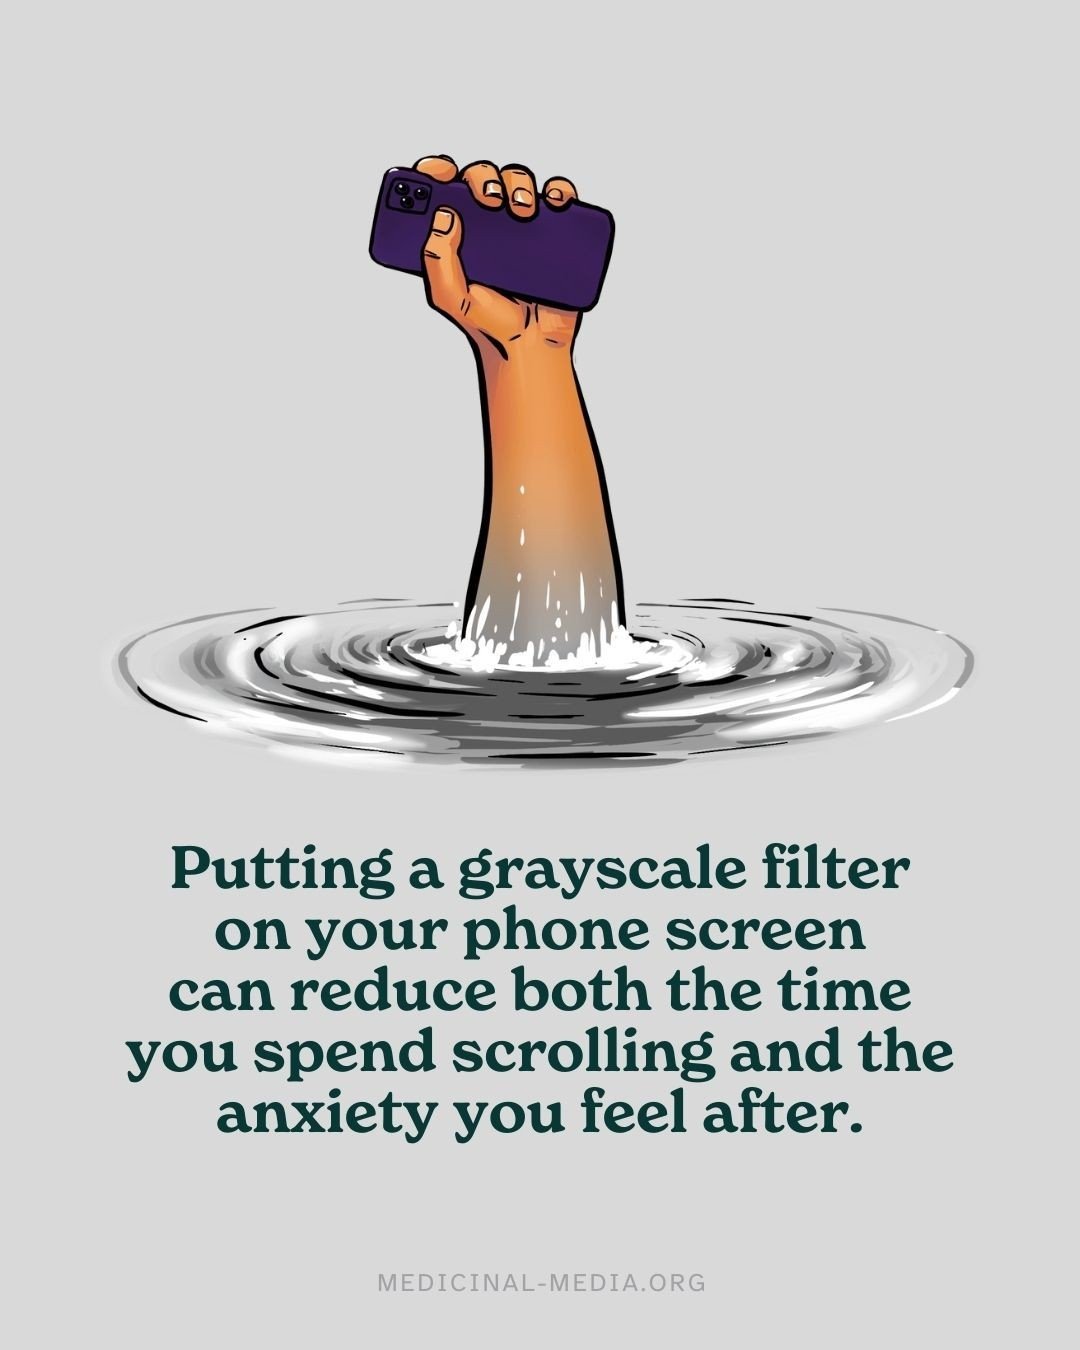 In an era of constant digital stimulation, a simple switch to grayscale on your phone screen could be the key to escaping the doomscrolling trap. 📵

For many of us, our phones have become a portal to never-ending anxiety and stress, delivering a ste